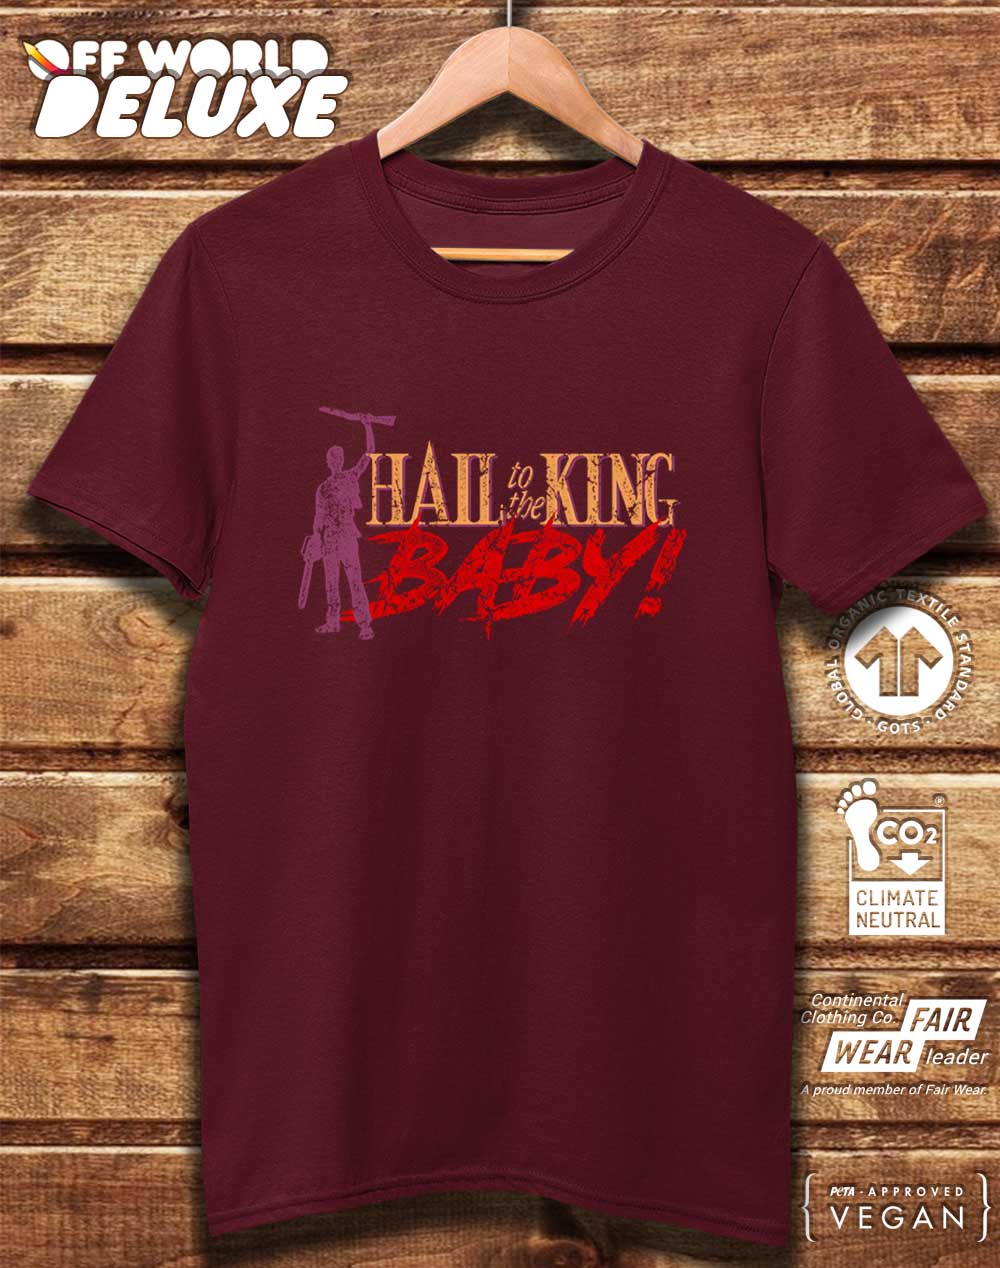 DELUXE Hail to the King Baby Organic Cotton T-Shirt